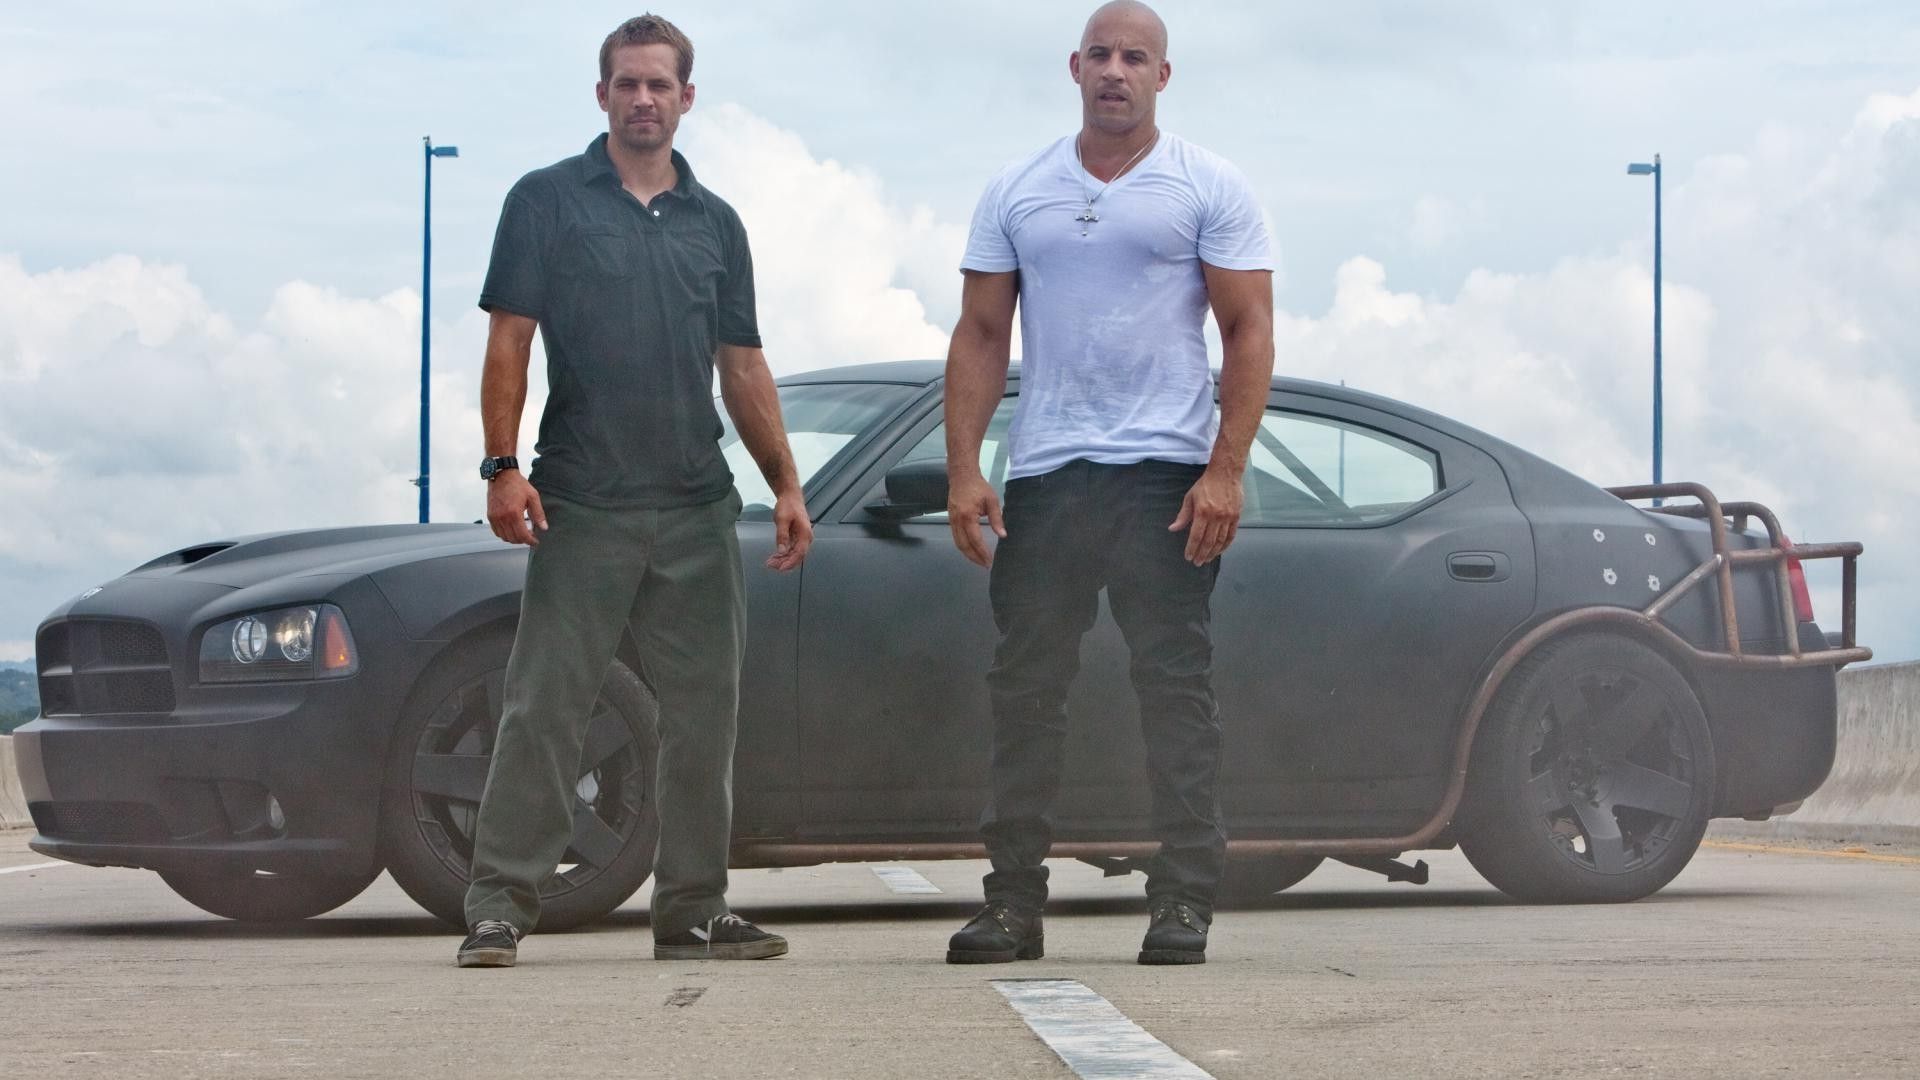 Fast And Furious 2 Wallpapers